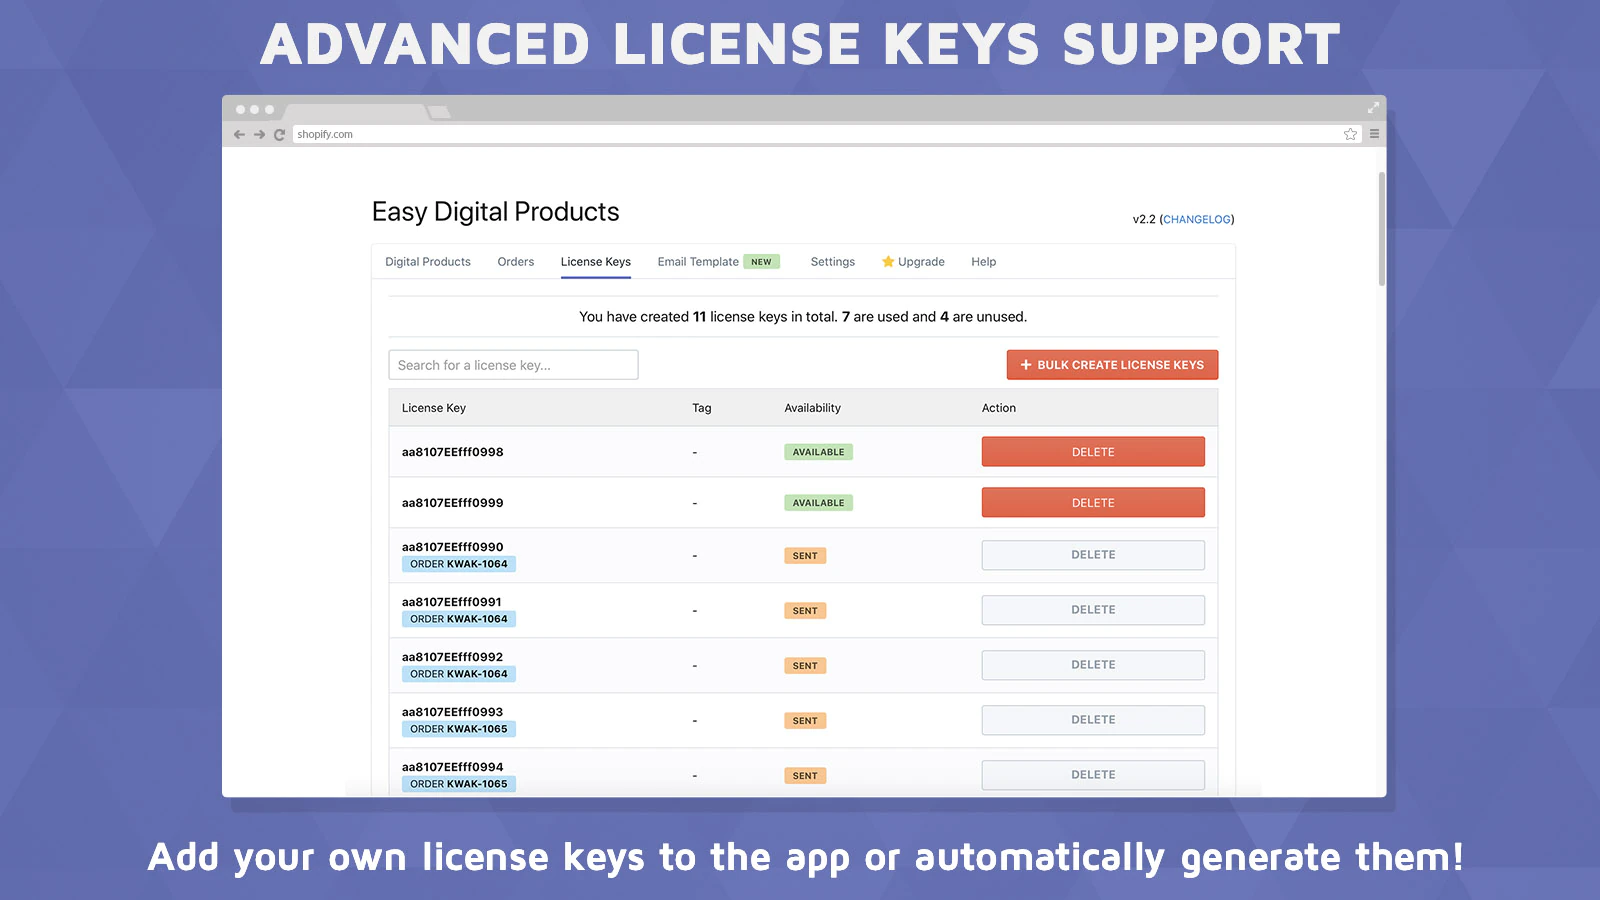 edp-easy-digital-products-license-keys-support